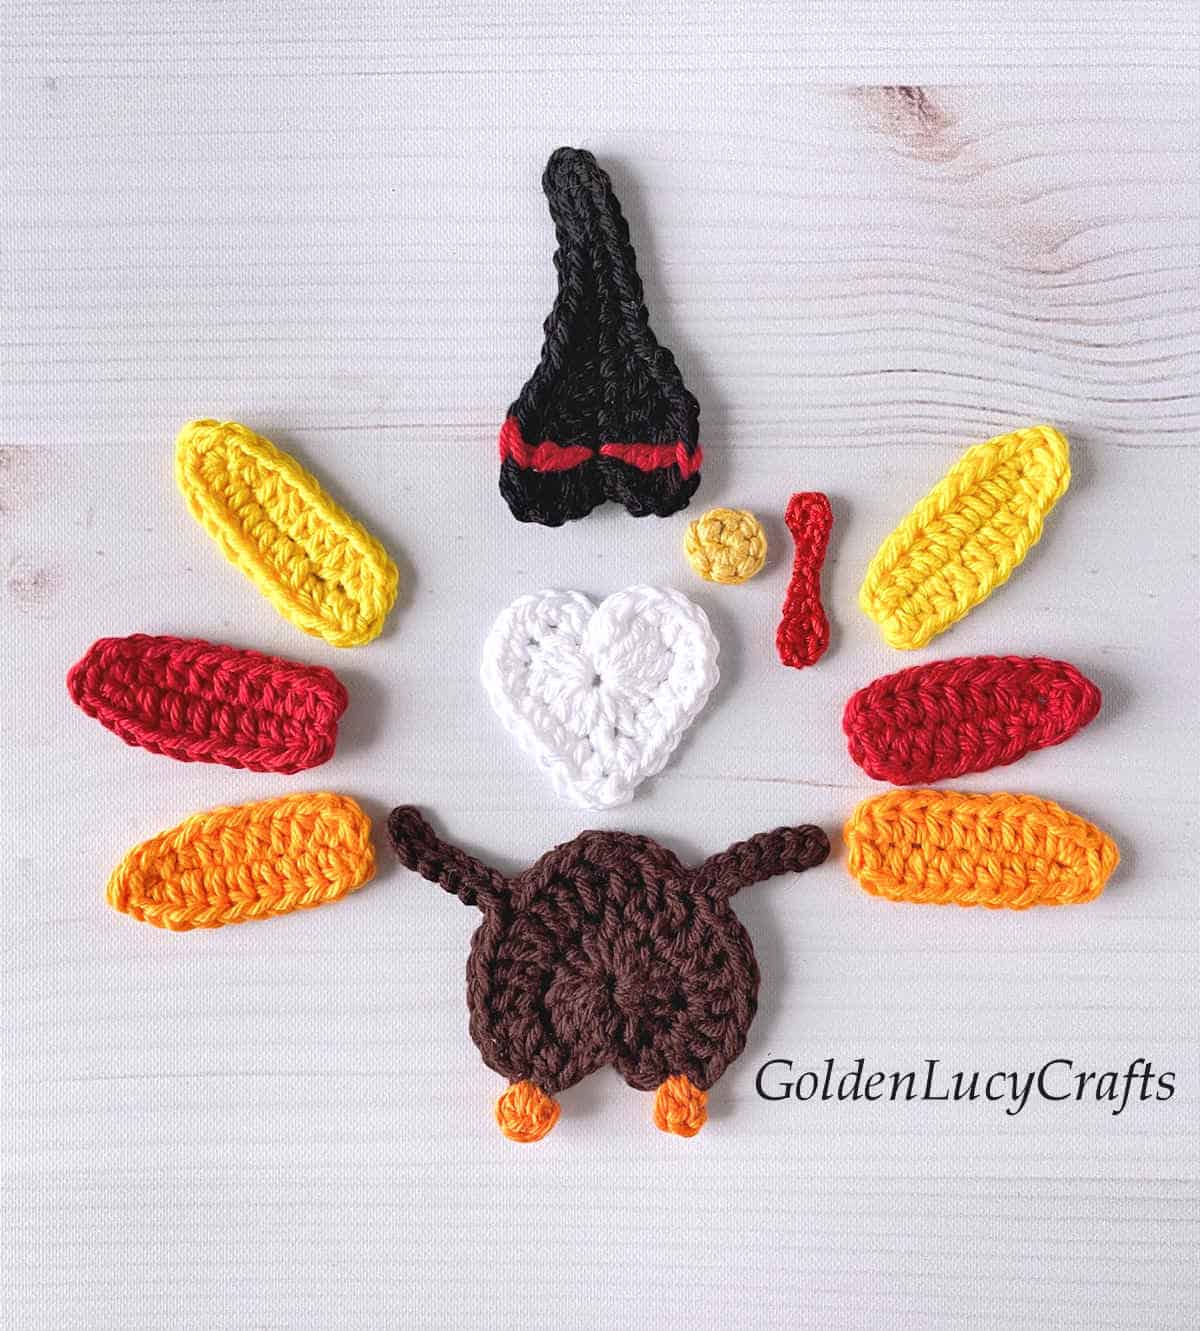 Parts of the crocheted turkey gnome.